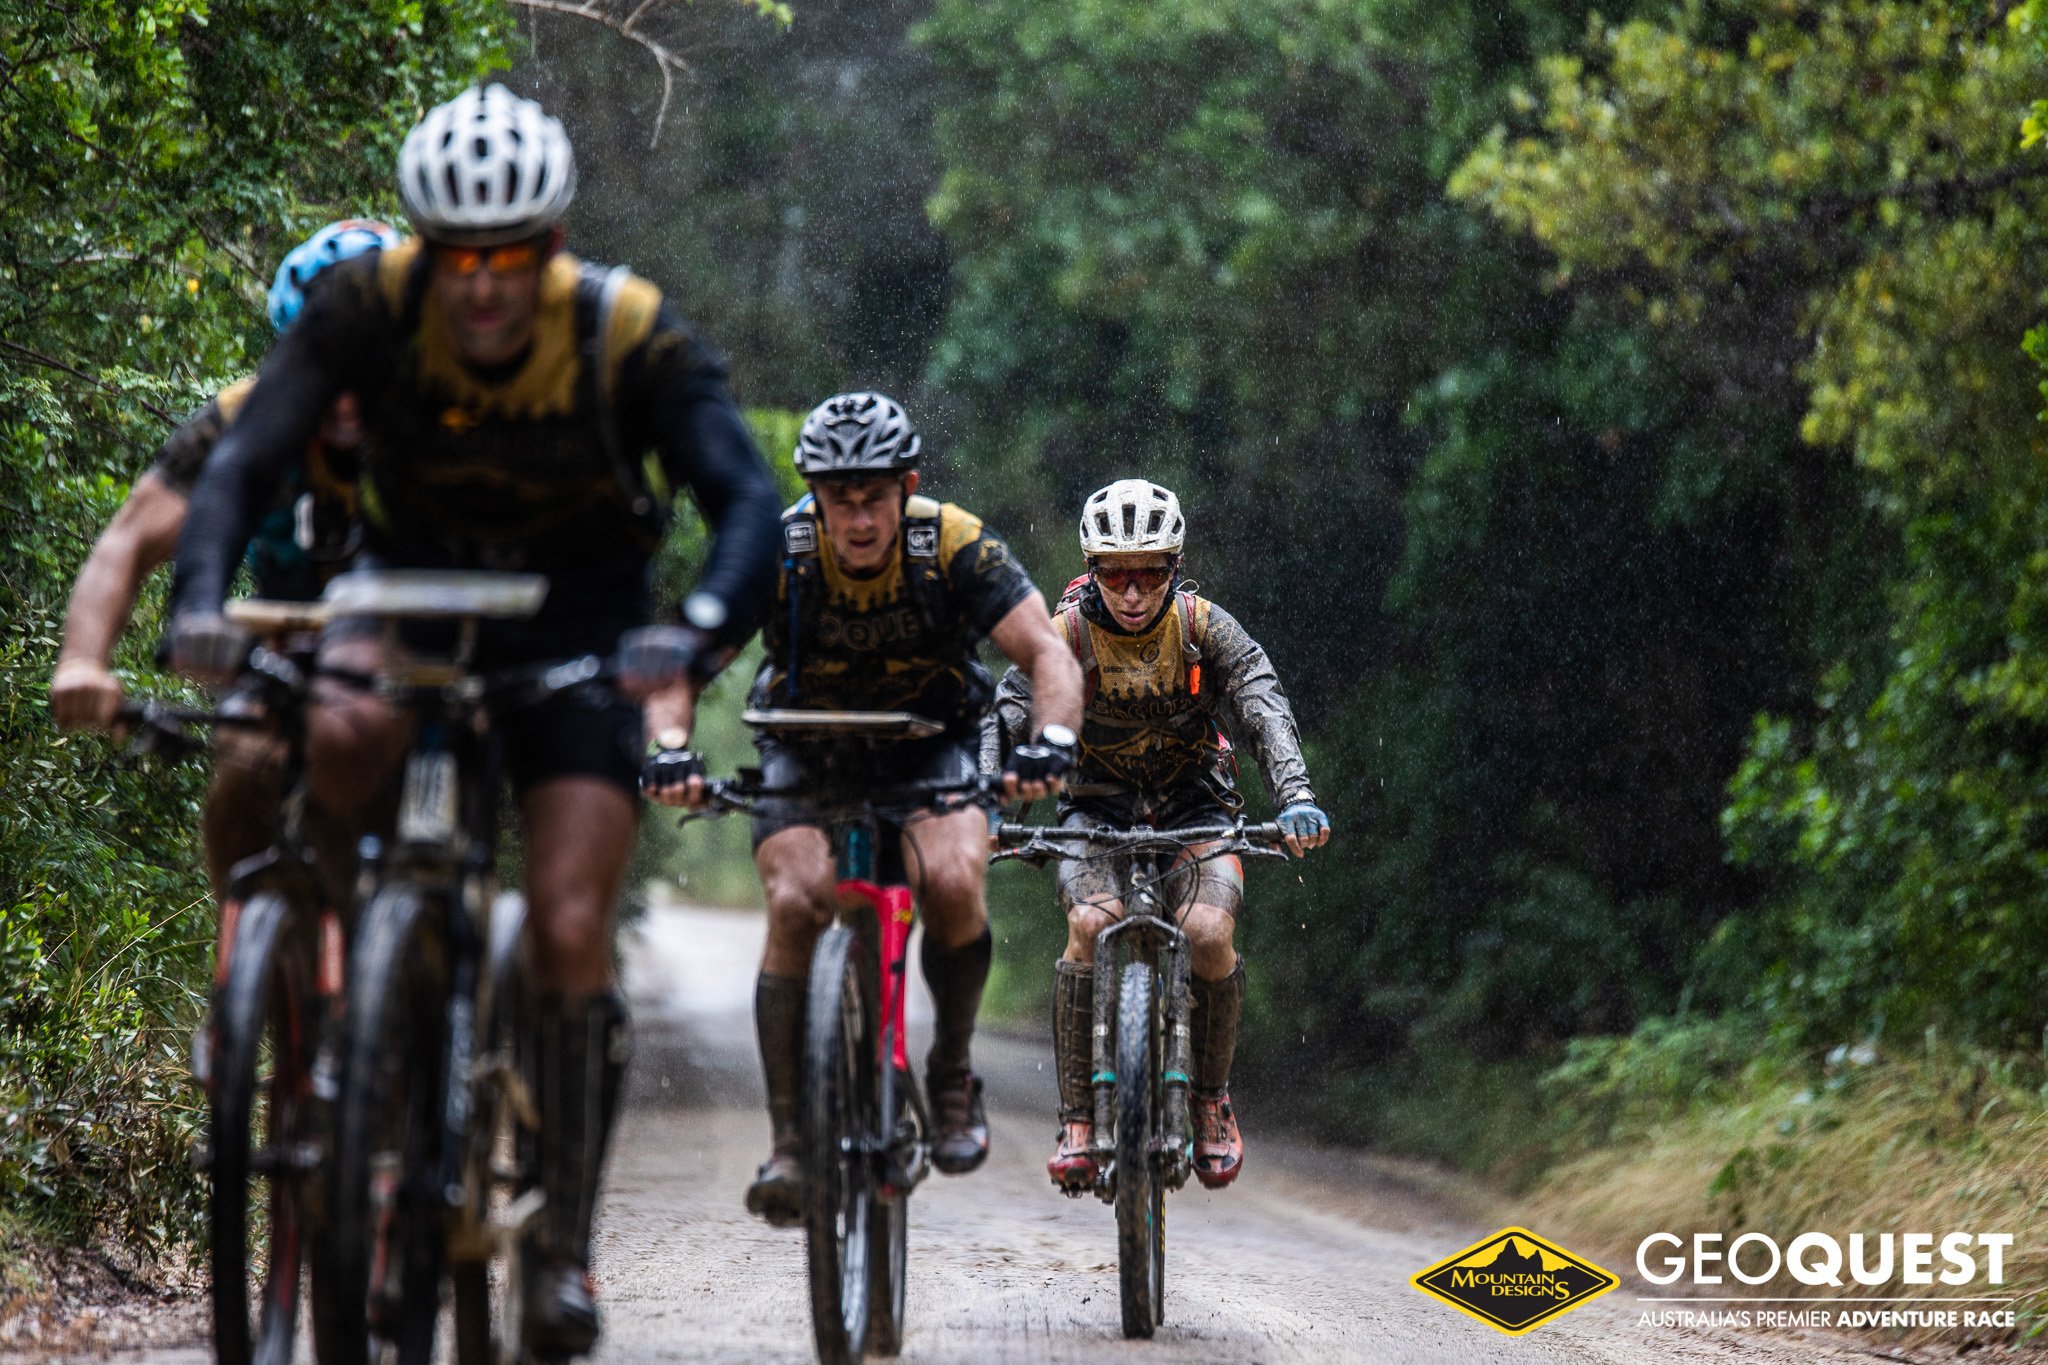 GeoQuest 2019 in Yamba was nothing less than epic &ndash; it was our first GeoQuest and was like a baptism of fire. The course was spectacular and we'd love to go back to the region. We've certainly come a long way in terms of event delivery since 20